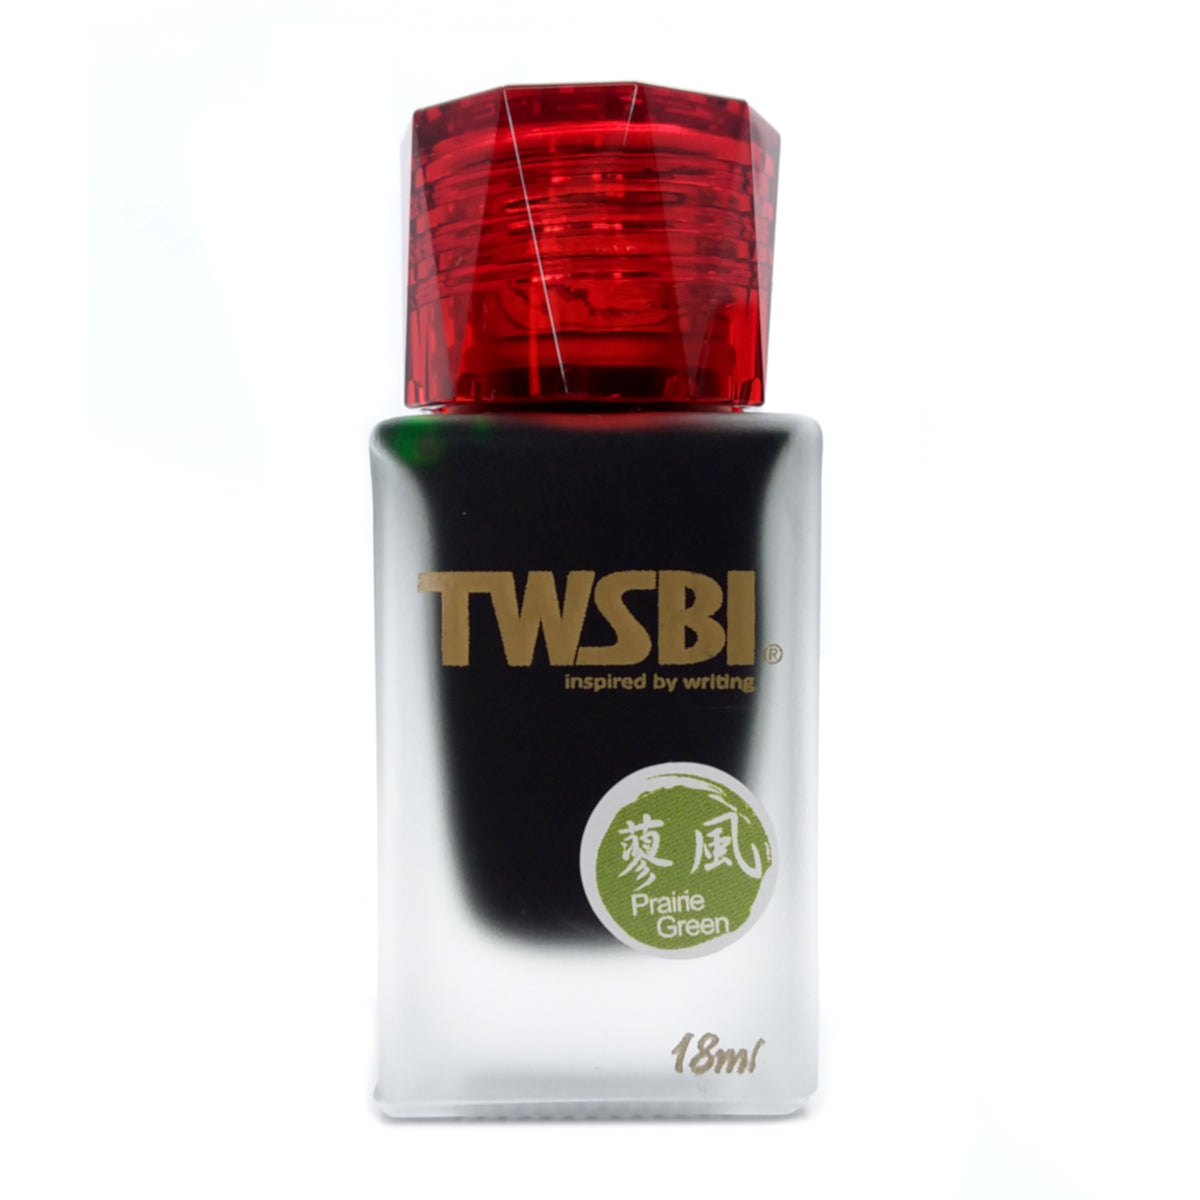 TWSBI Prairie Green is a bright lime green fountain pen ink with low shading. It dries in 20 seconds in a medium nib on Rhodia paper and has an average flow. TWSBI is based in Taiwan and the ink is produced in China.